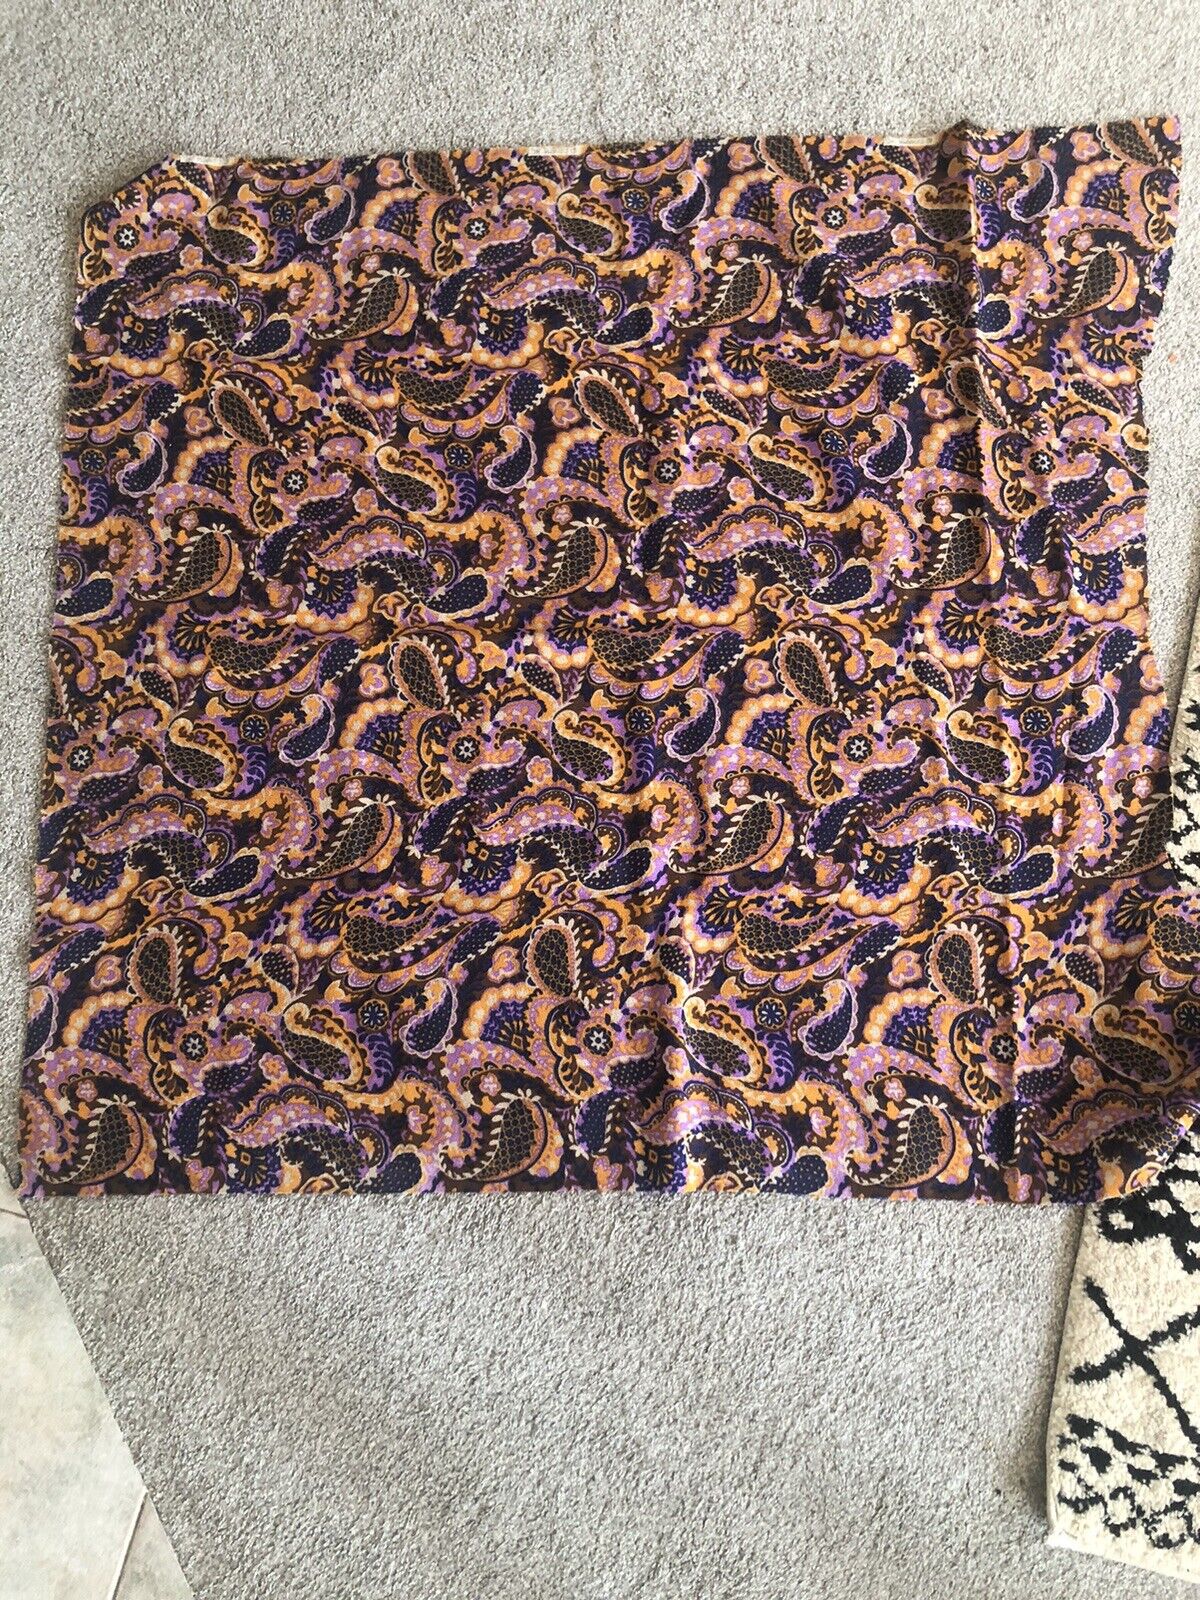 Vintage Cohama Inc. Paisley Floral Fabric Woven. Approximately 44”x42”